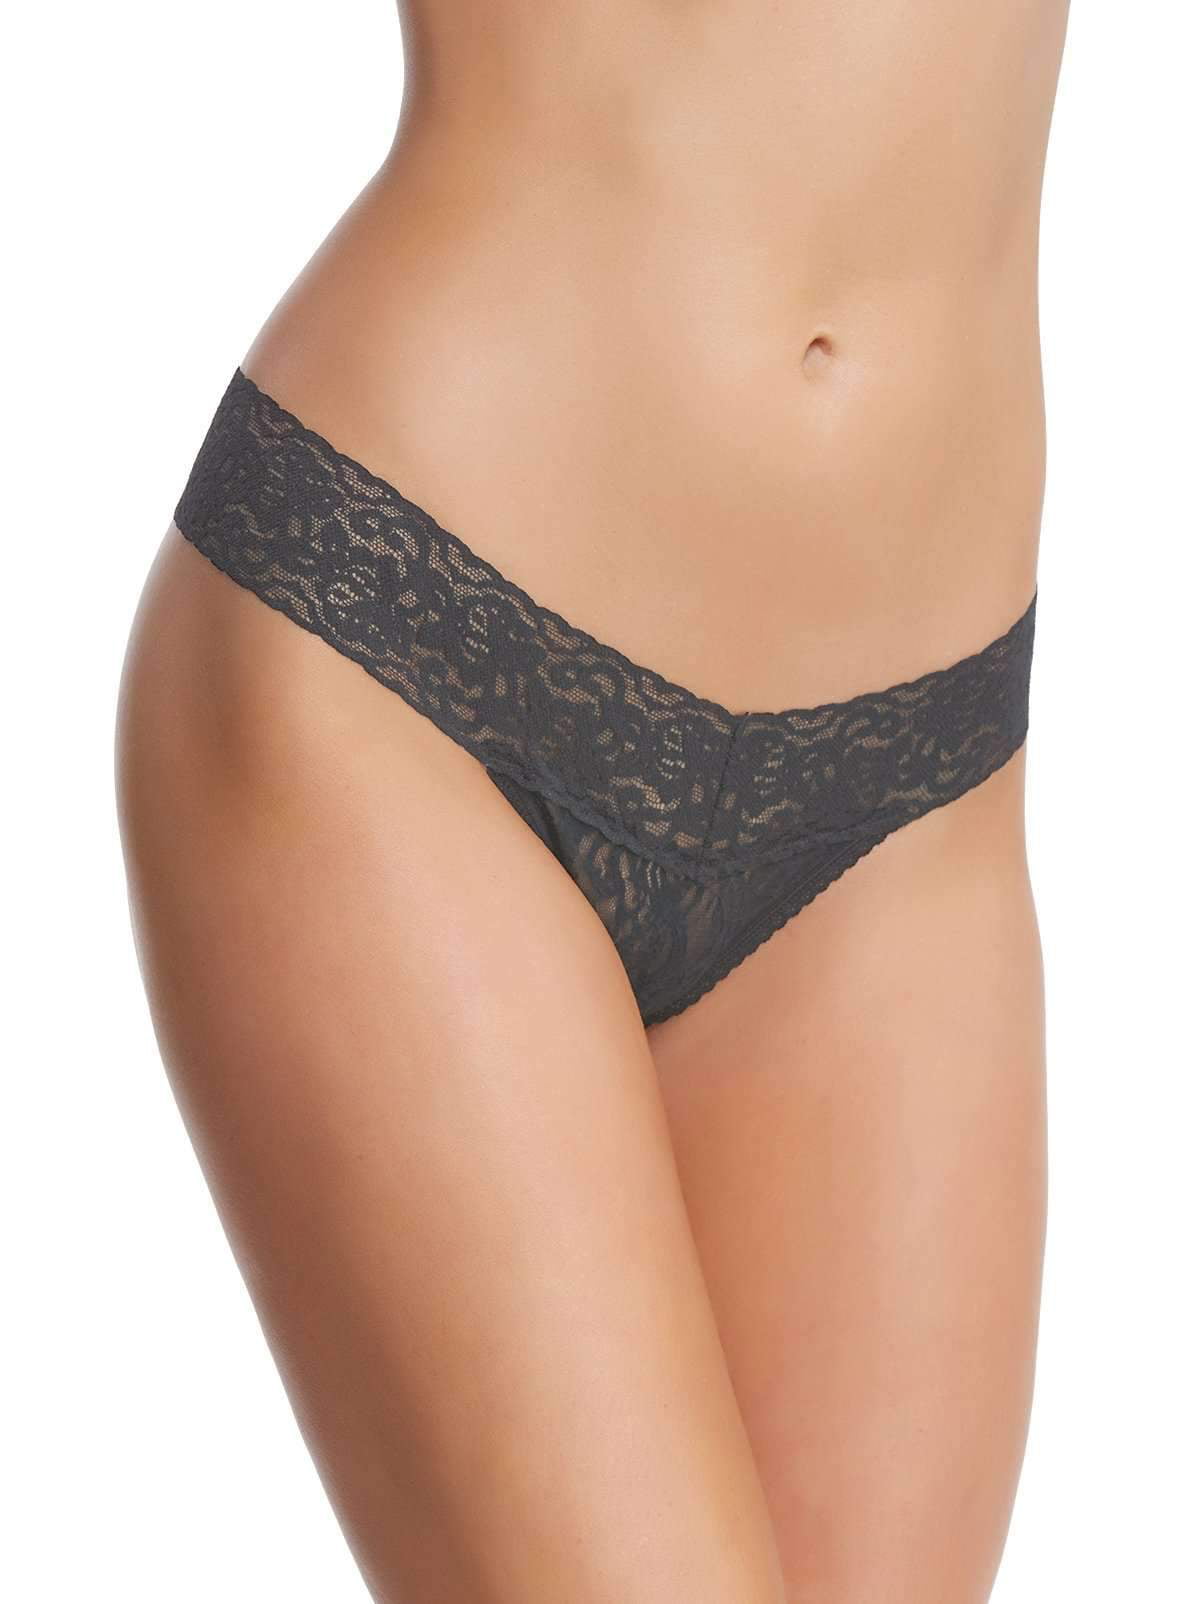 Panty Felina Signature Stretchy Lace Low Rise Thong 5-Pack 